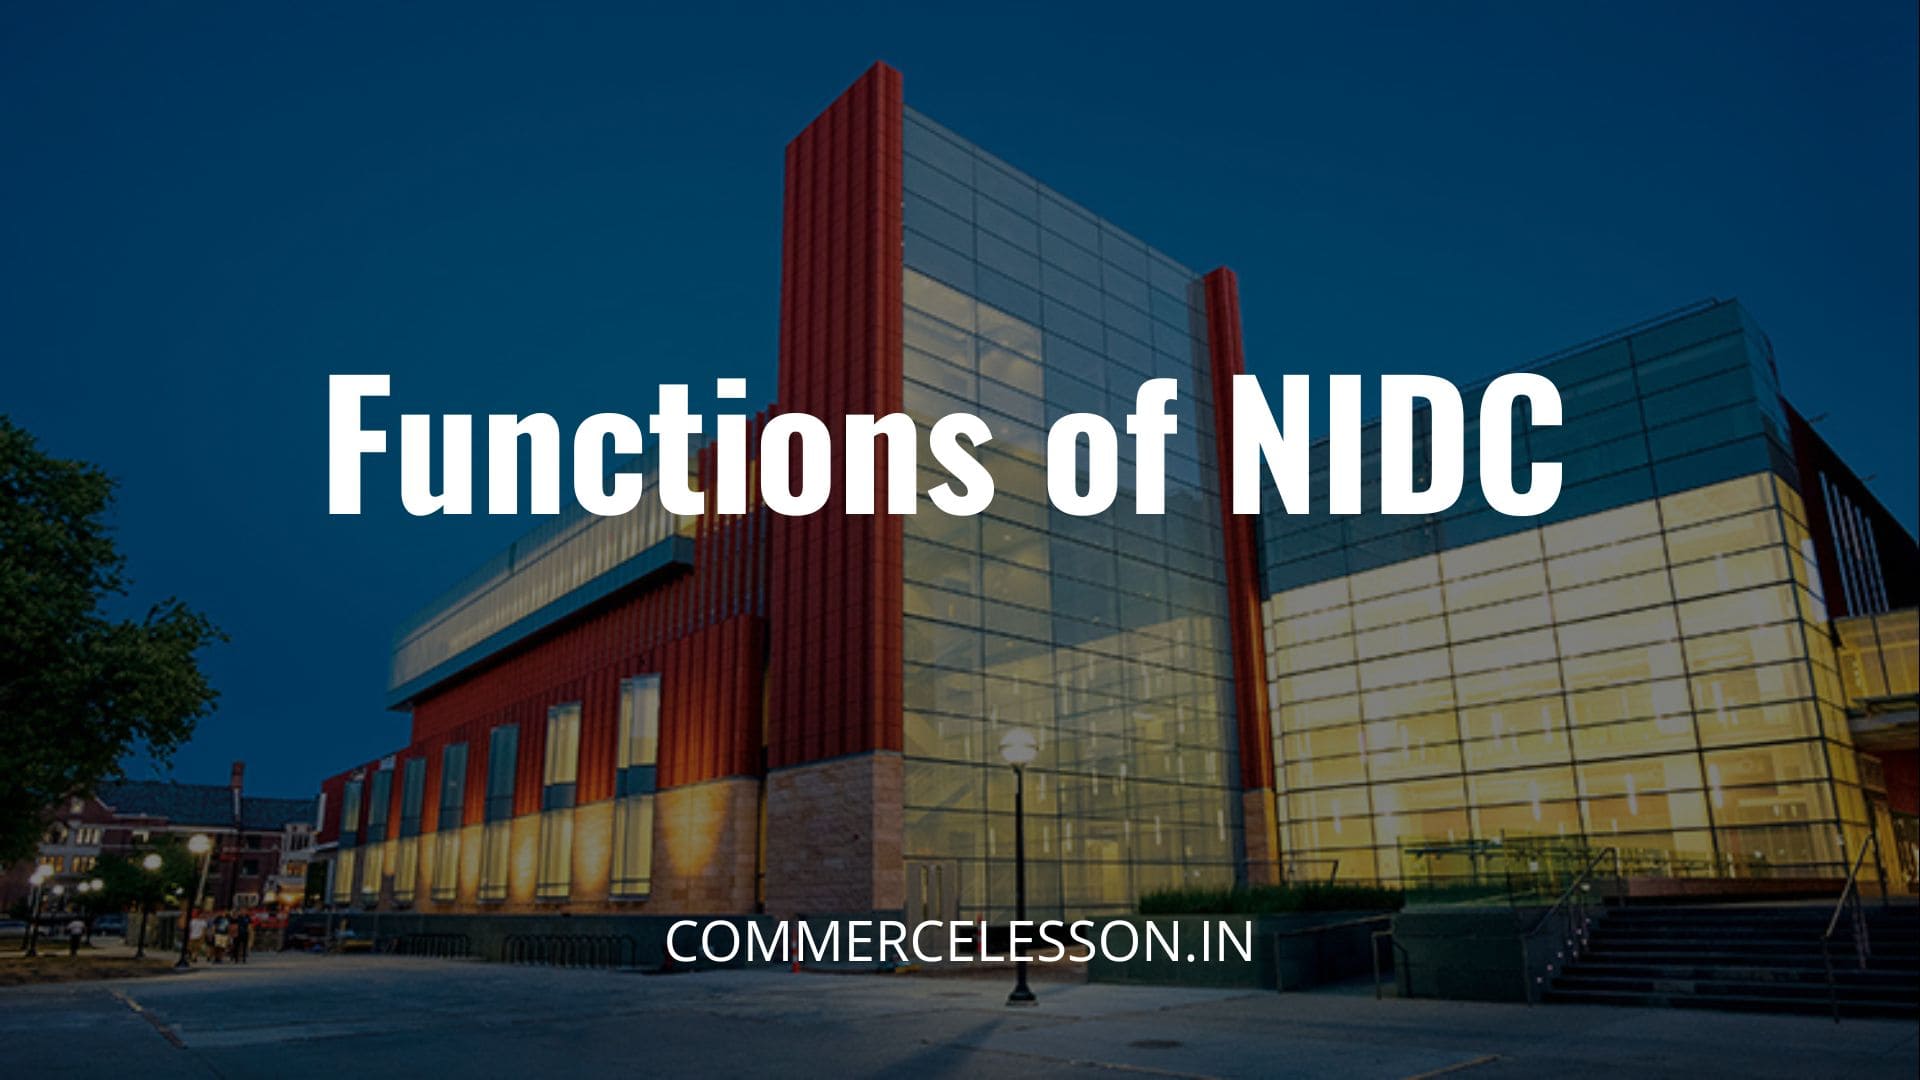 Functions of National Industrial Development Corporation